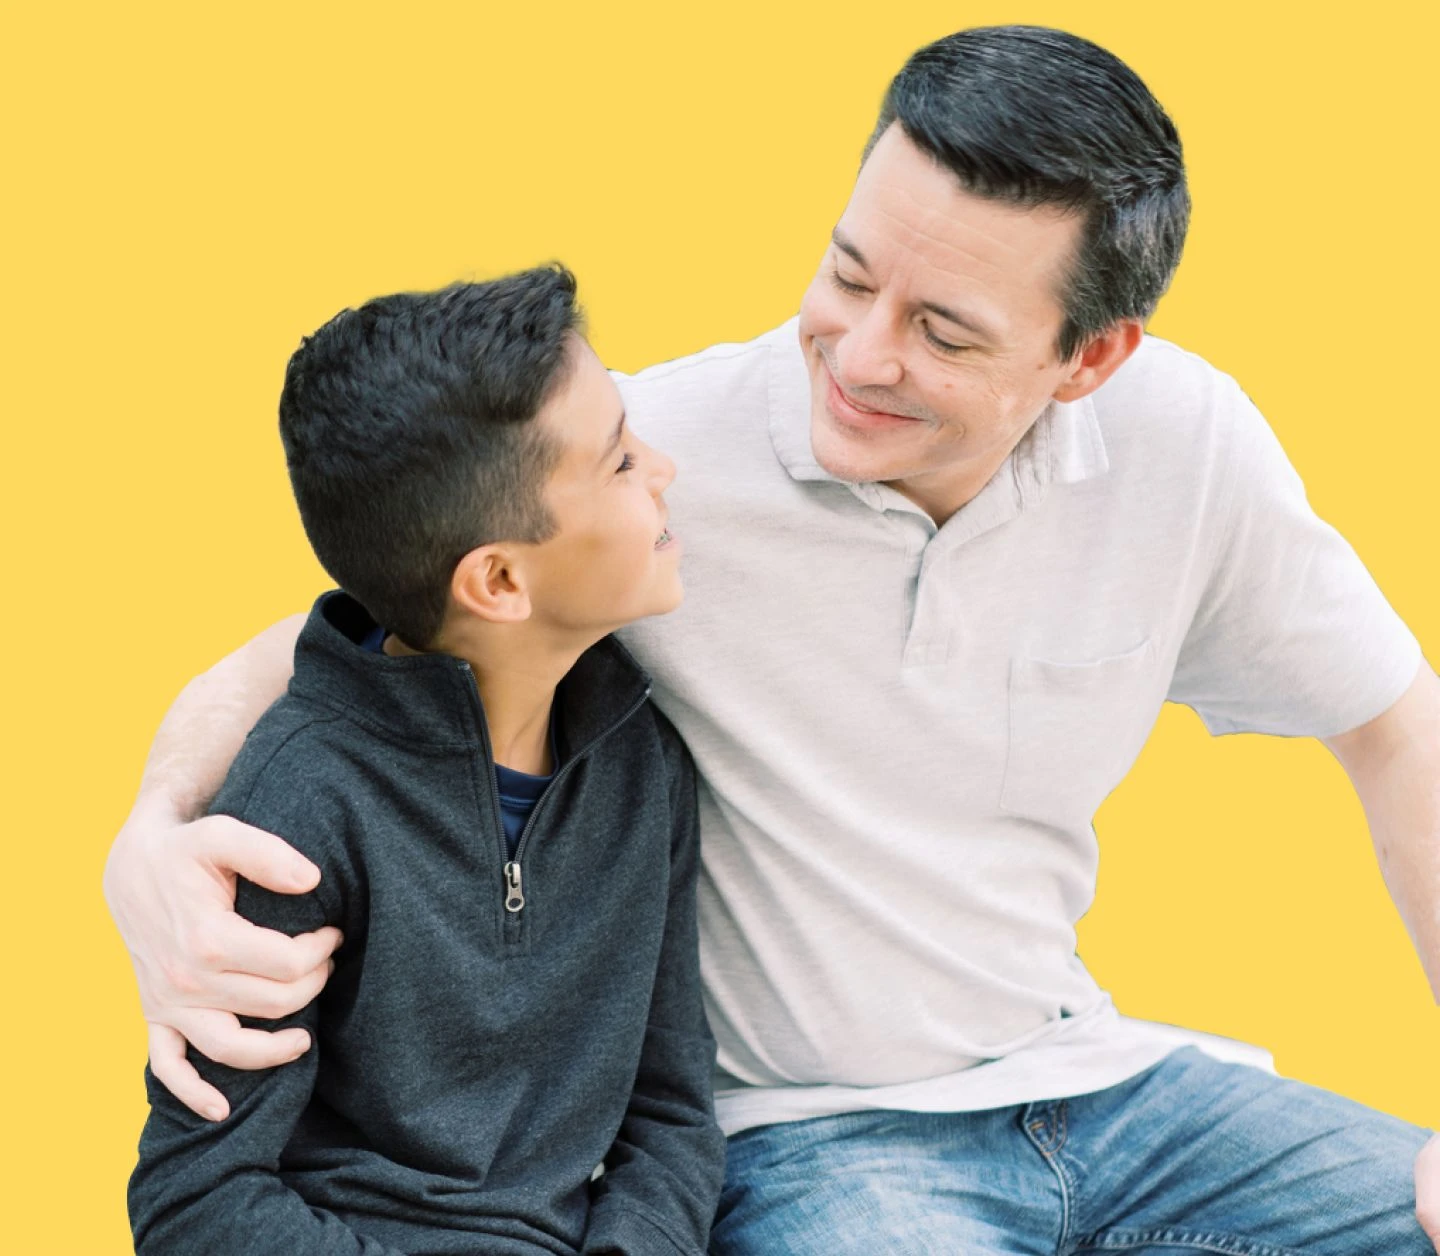 Dad hugging son with one arm as they sit side-by-side